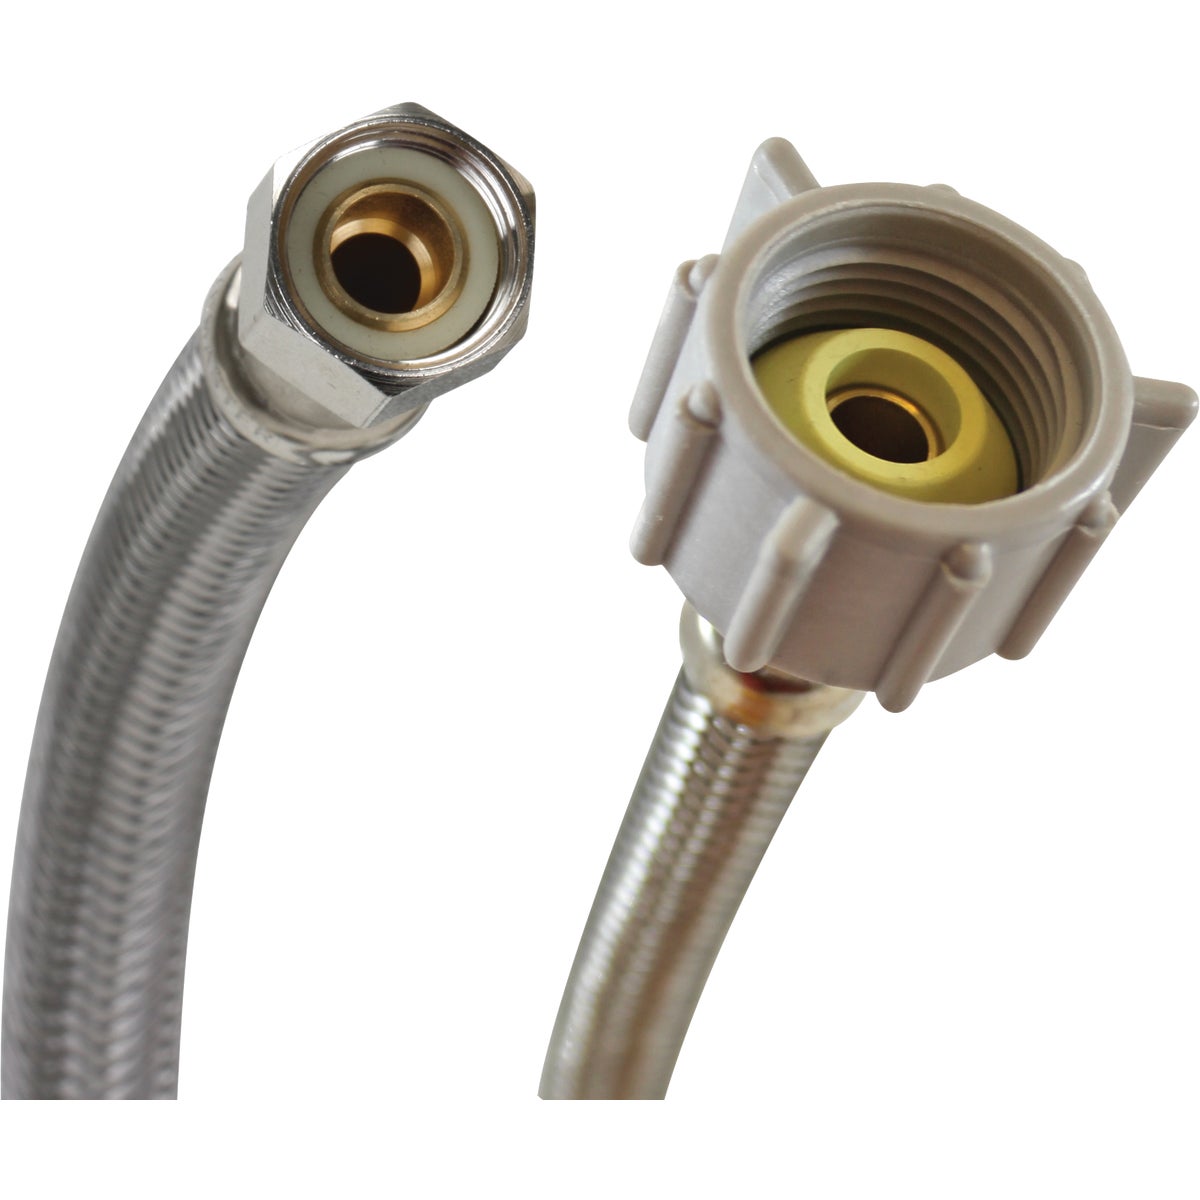 Fluidmaster 3/8 In. Comp x 7/8 In. Ballcock x 16 In. L Braided Stainless Steel Toilet Connector